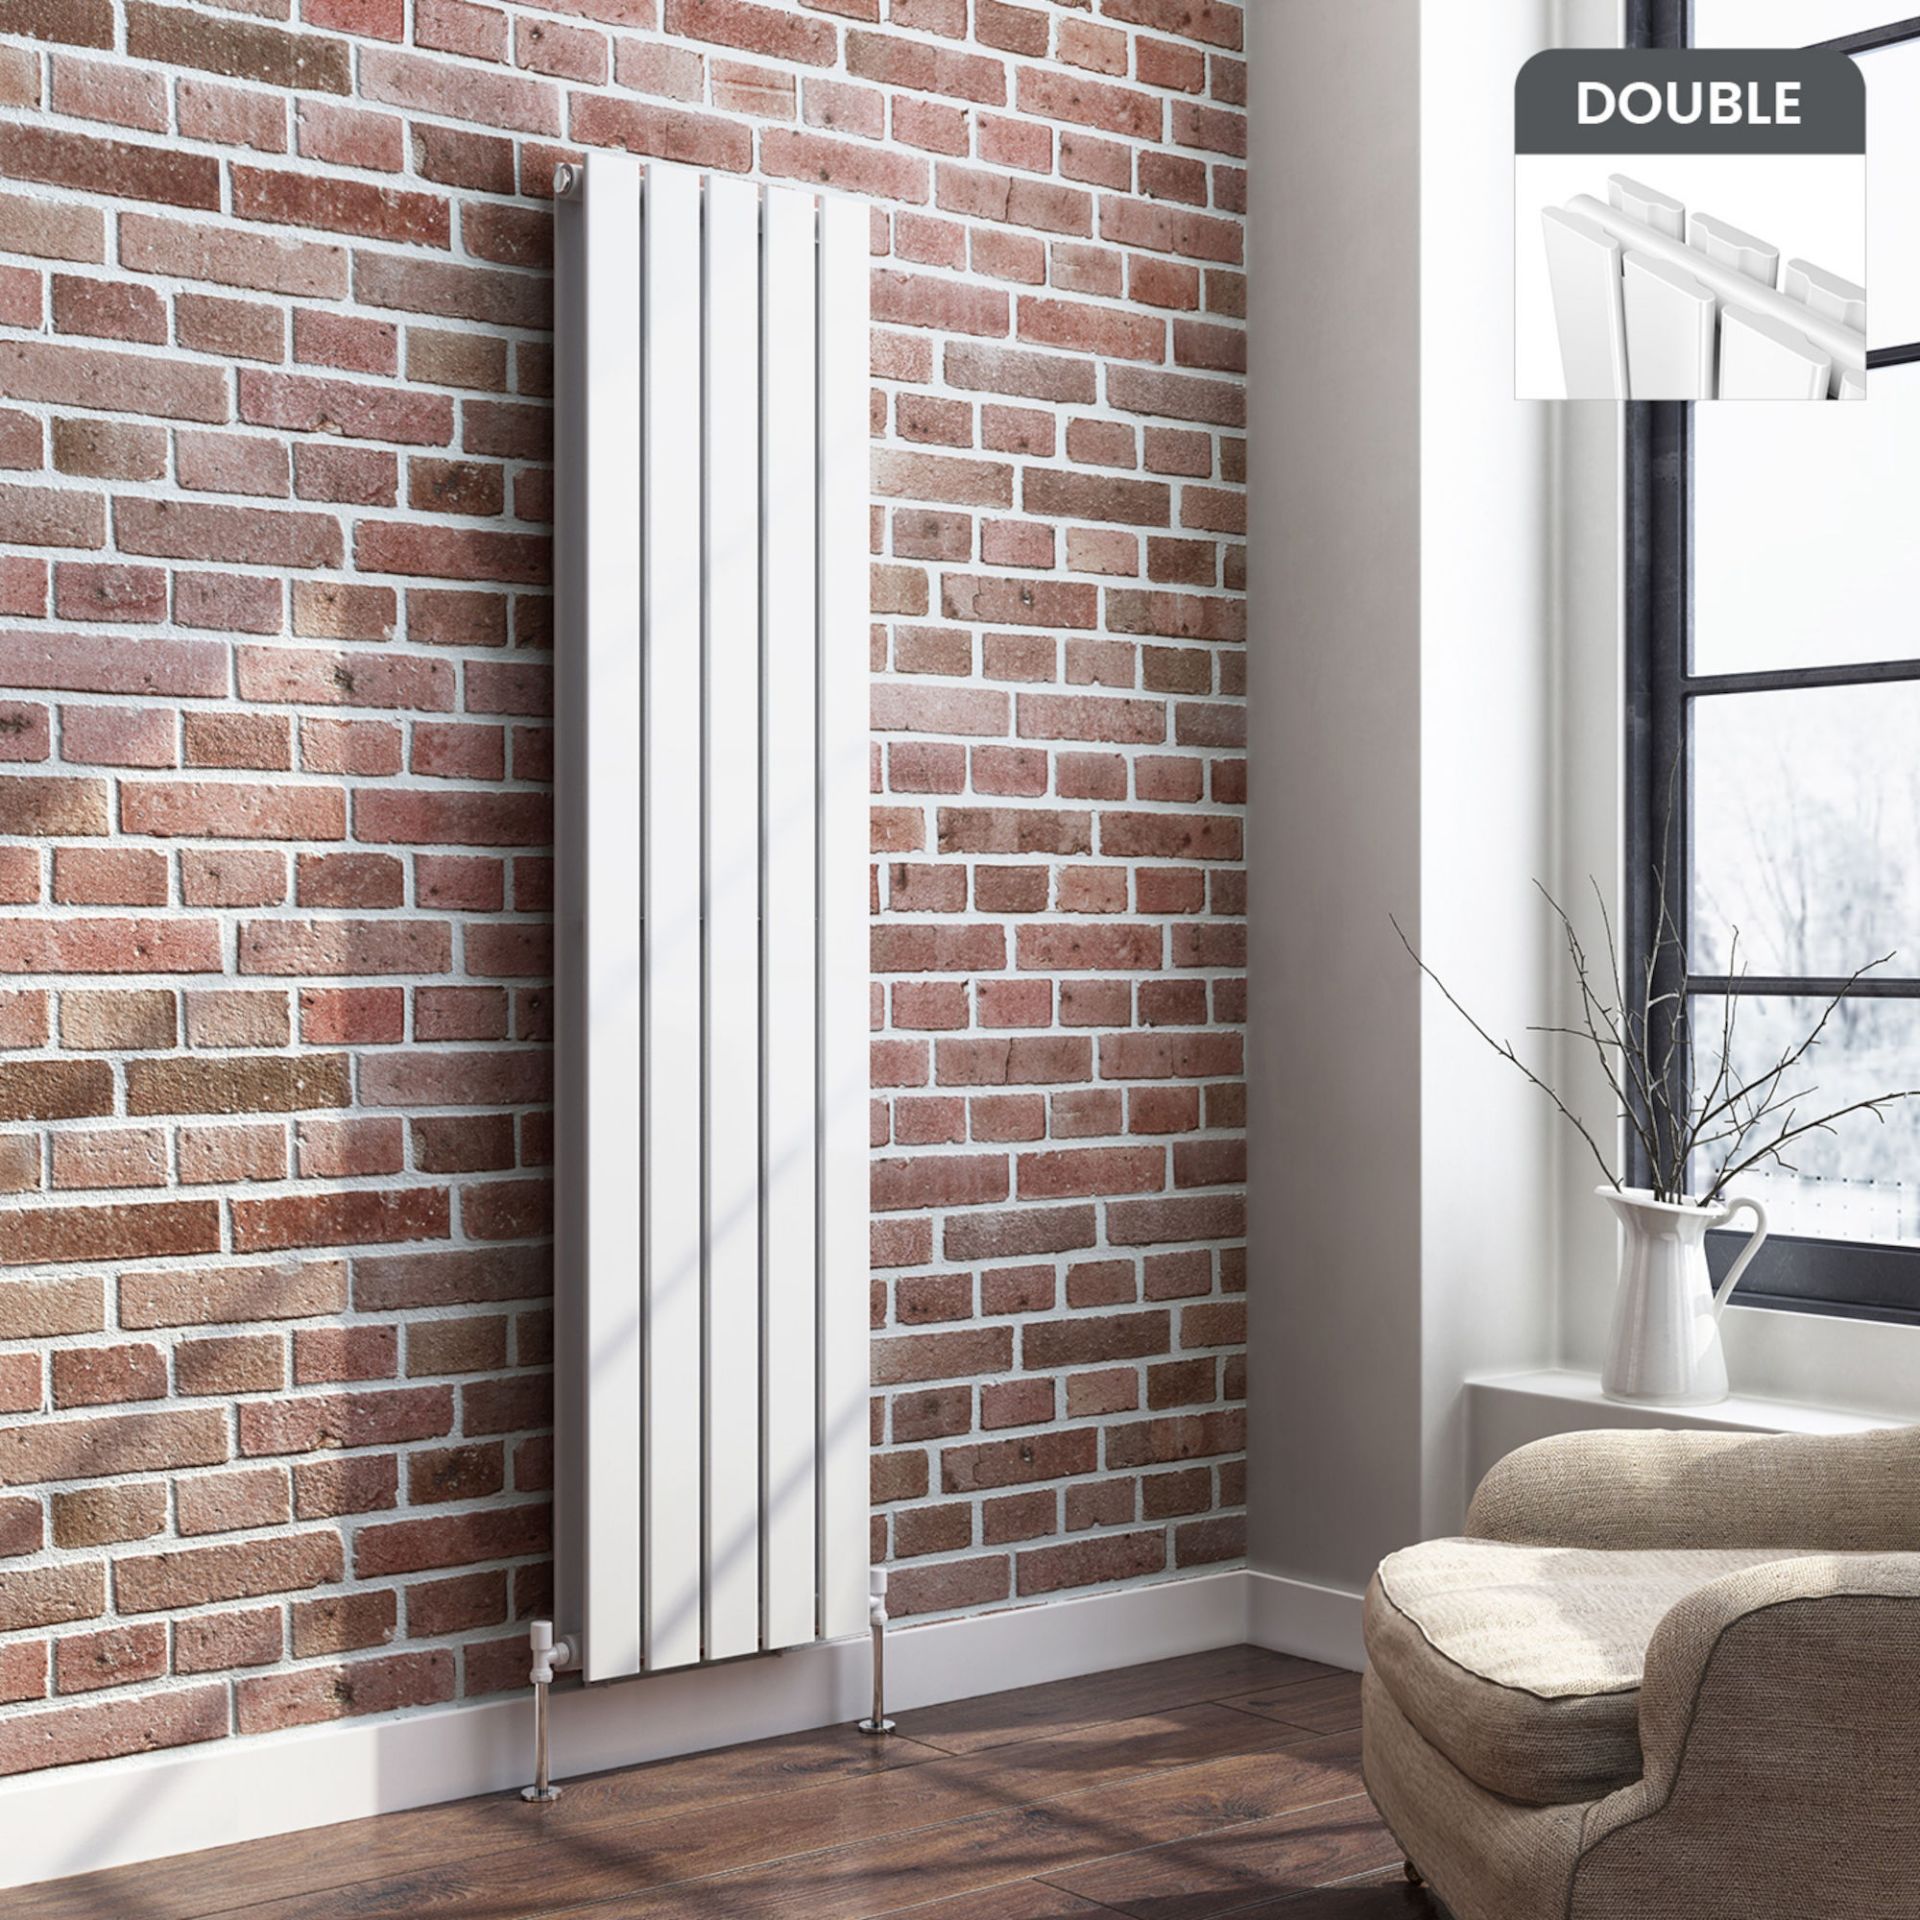 (Z165) 1600x376mm Gloss White Double Flat Panel Vertical Radiator. RRP £407.99. We love this b...